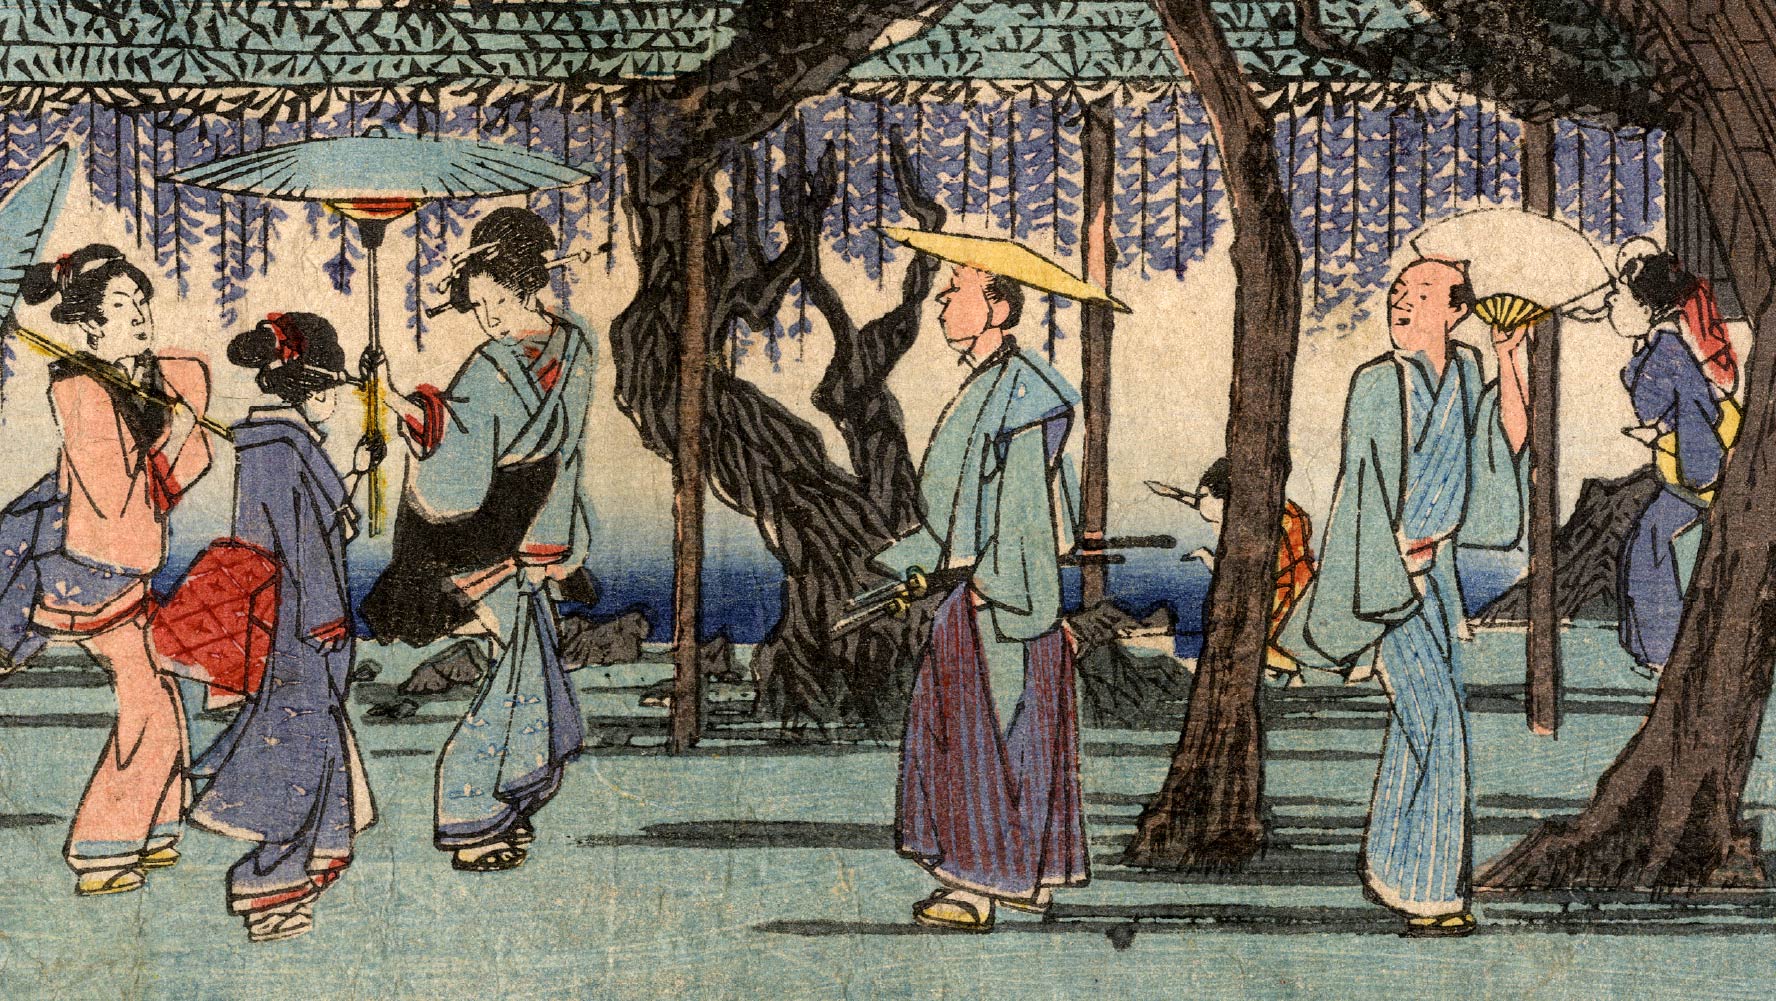 Japanese painting of people walking along a forest street by Hiroshige